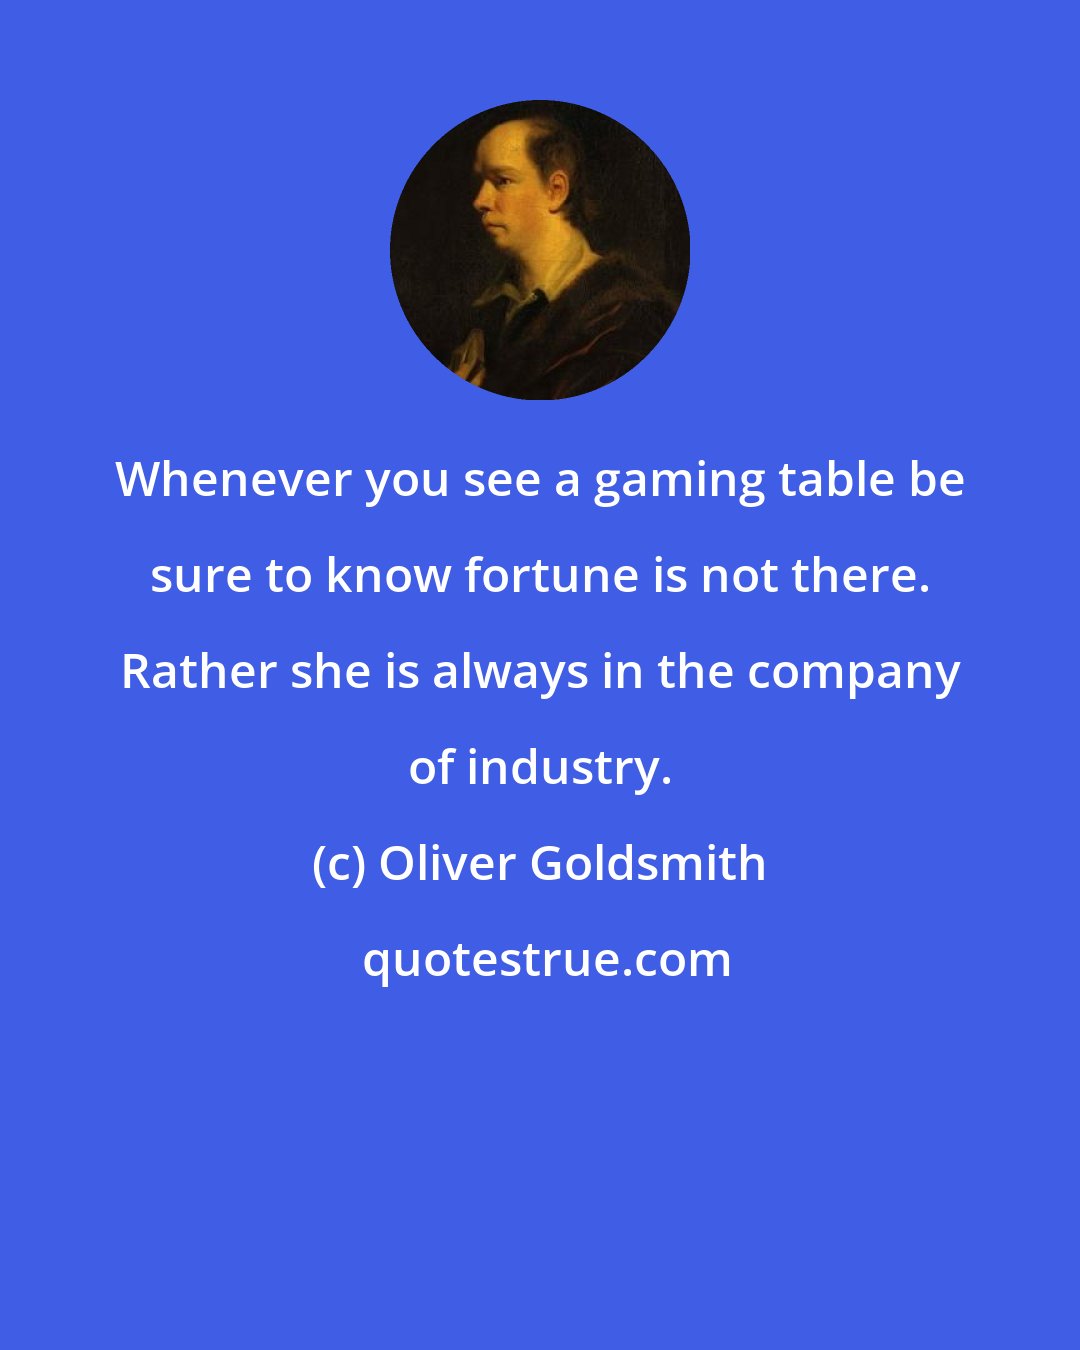 Oliver Goldsmith: Whenever you see a gaming table be sure to know fortune is not there. Rather she is always in the company of industry.